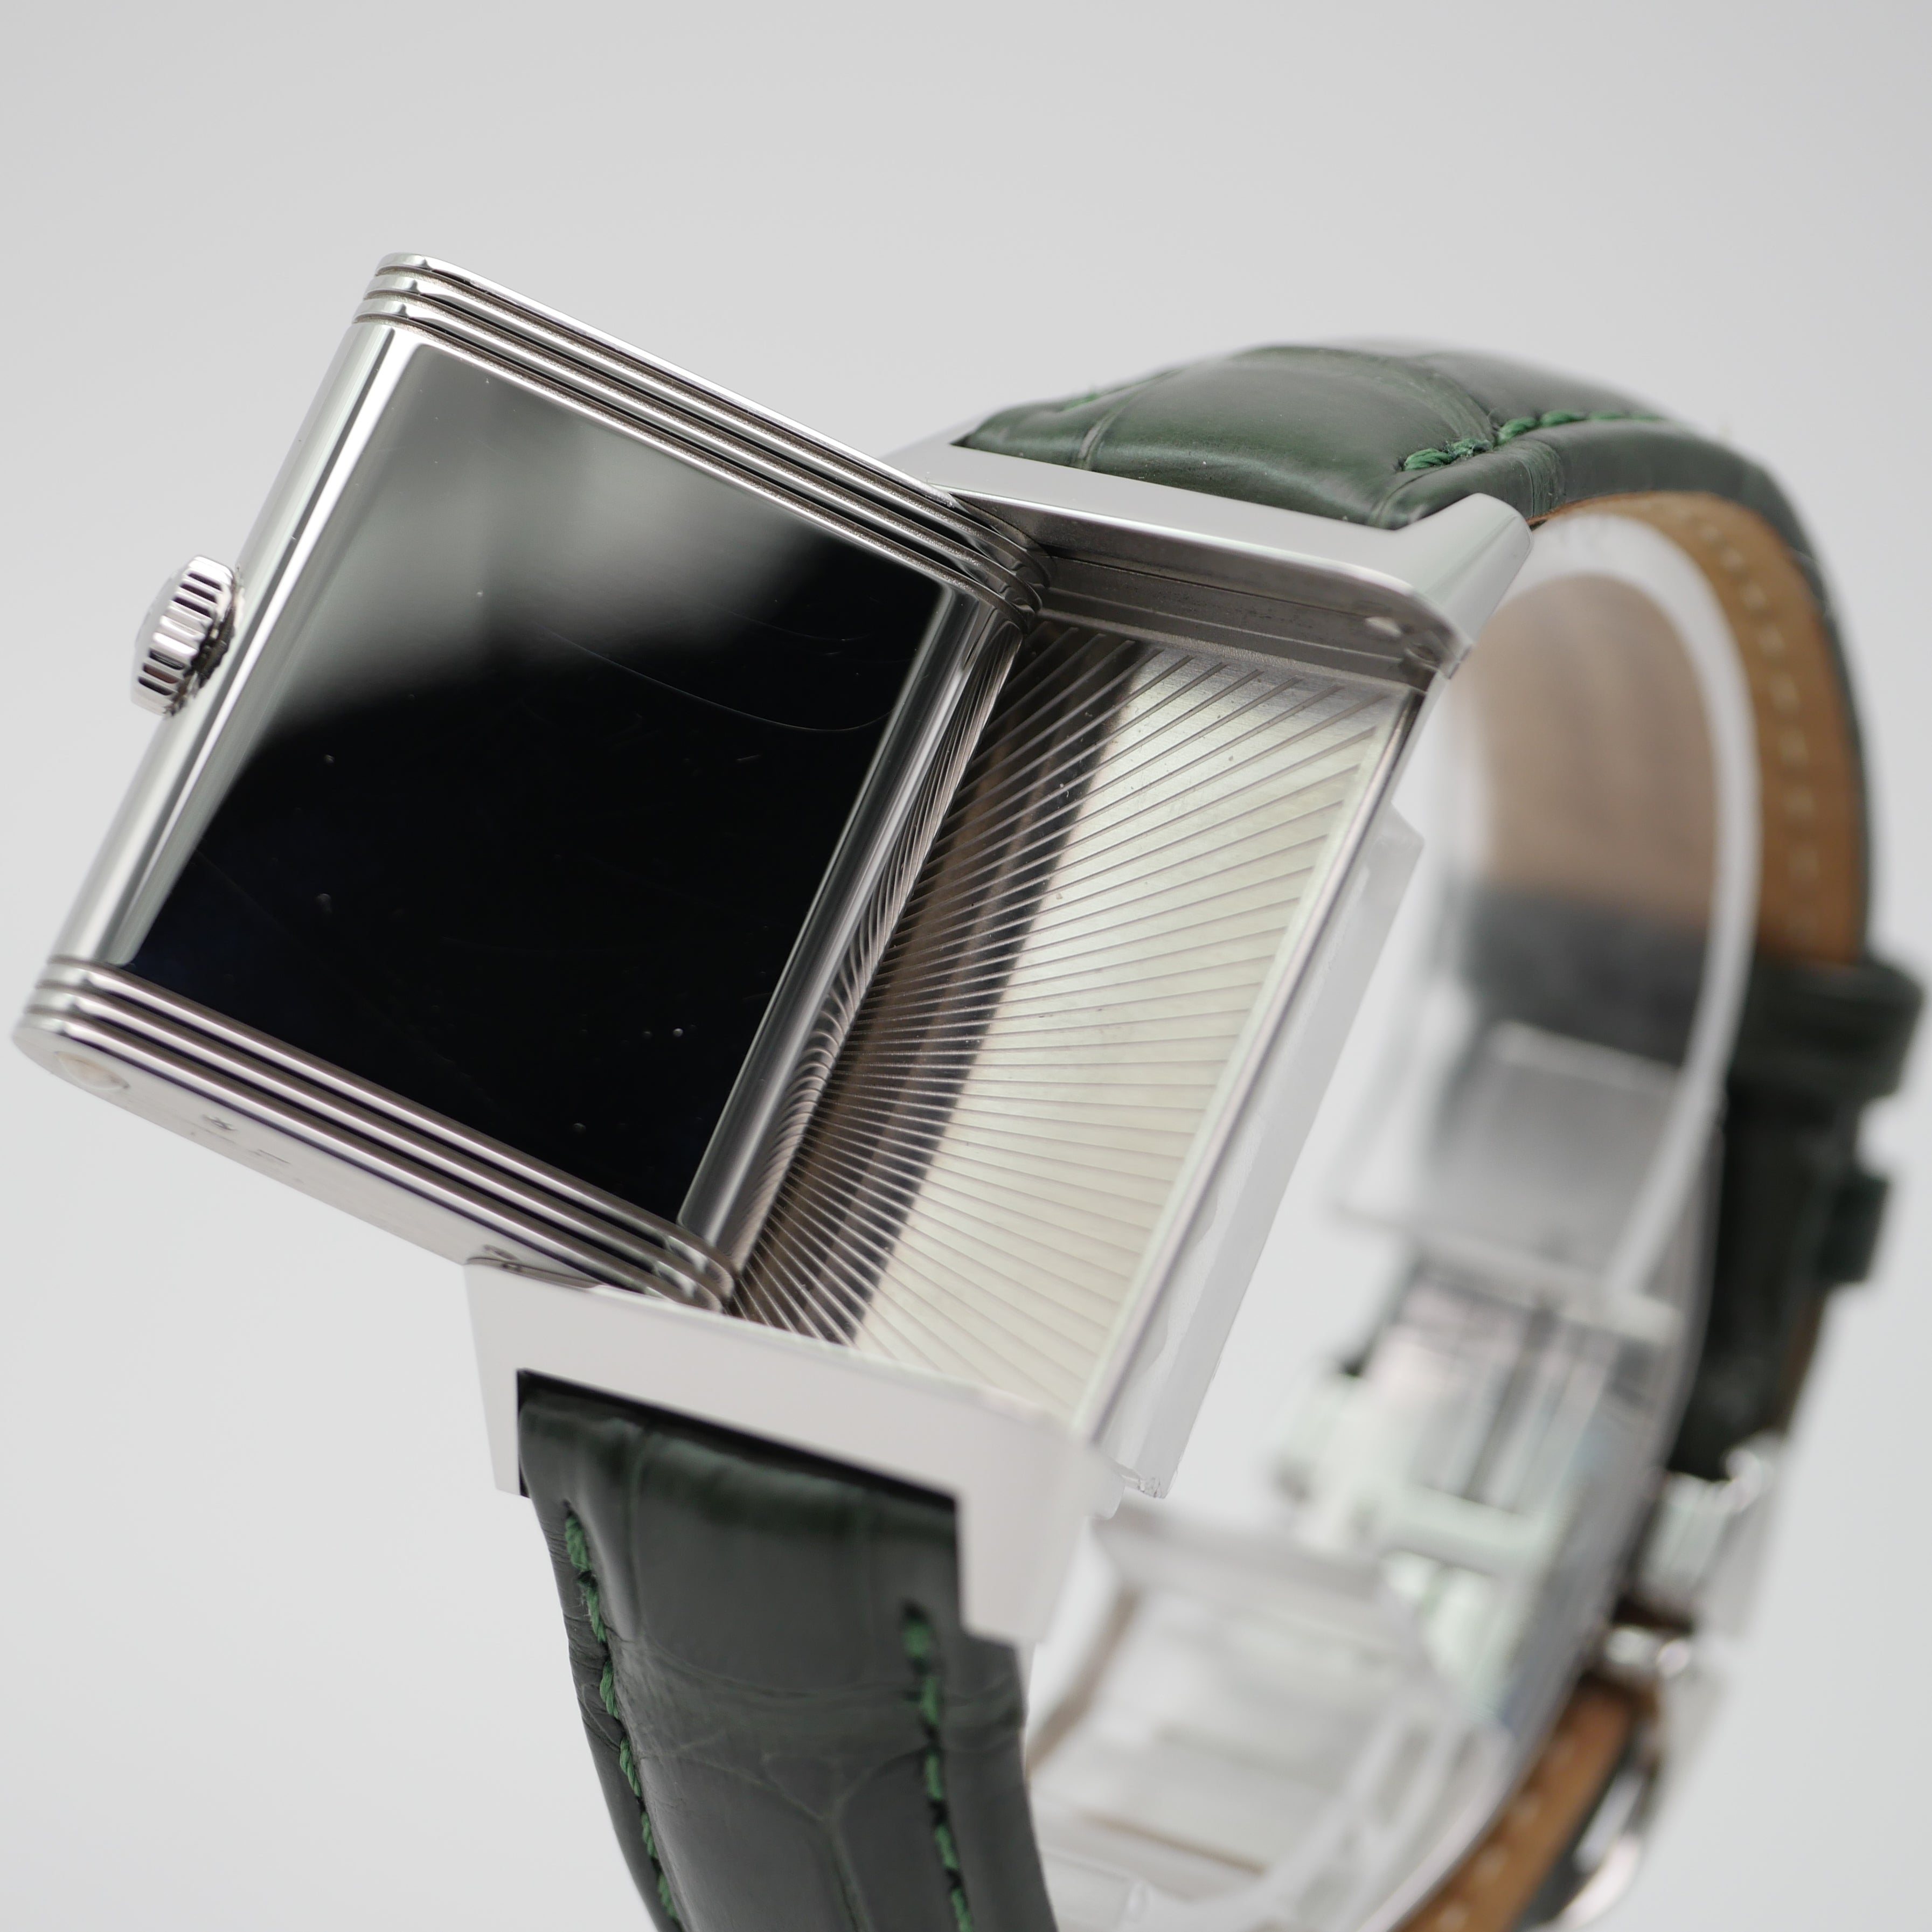 Jaeger-LeCoultre Reverso Tribute small seconds Stahl Q3978430 - 2021